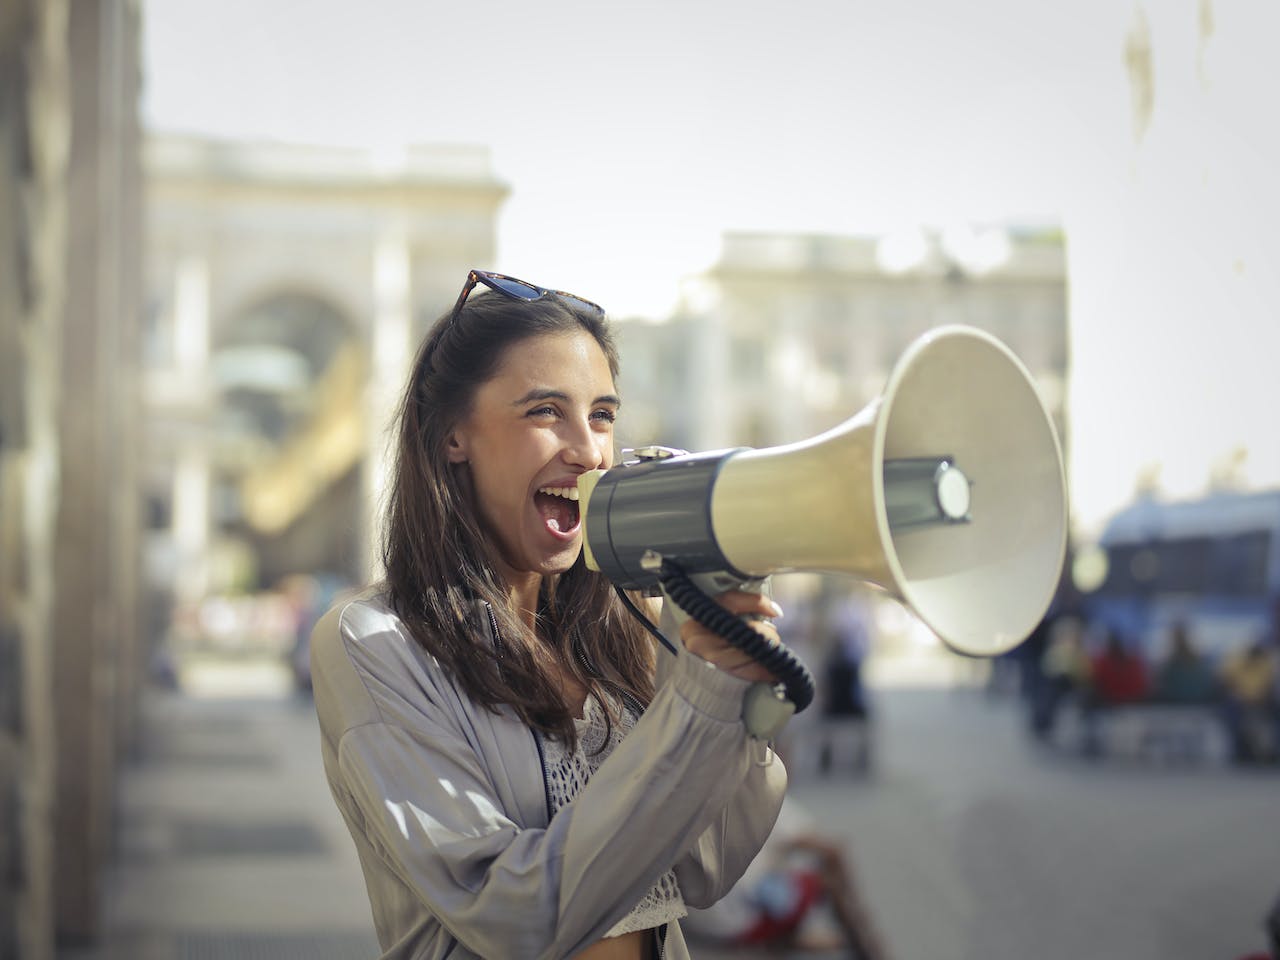 Seven tips for crafting compelling calls to action that convert